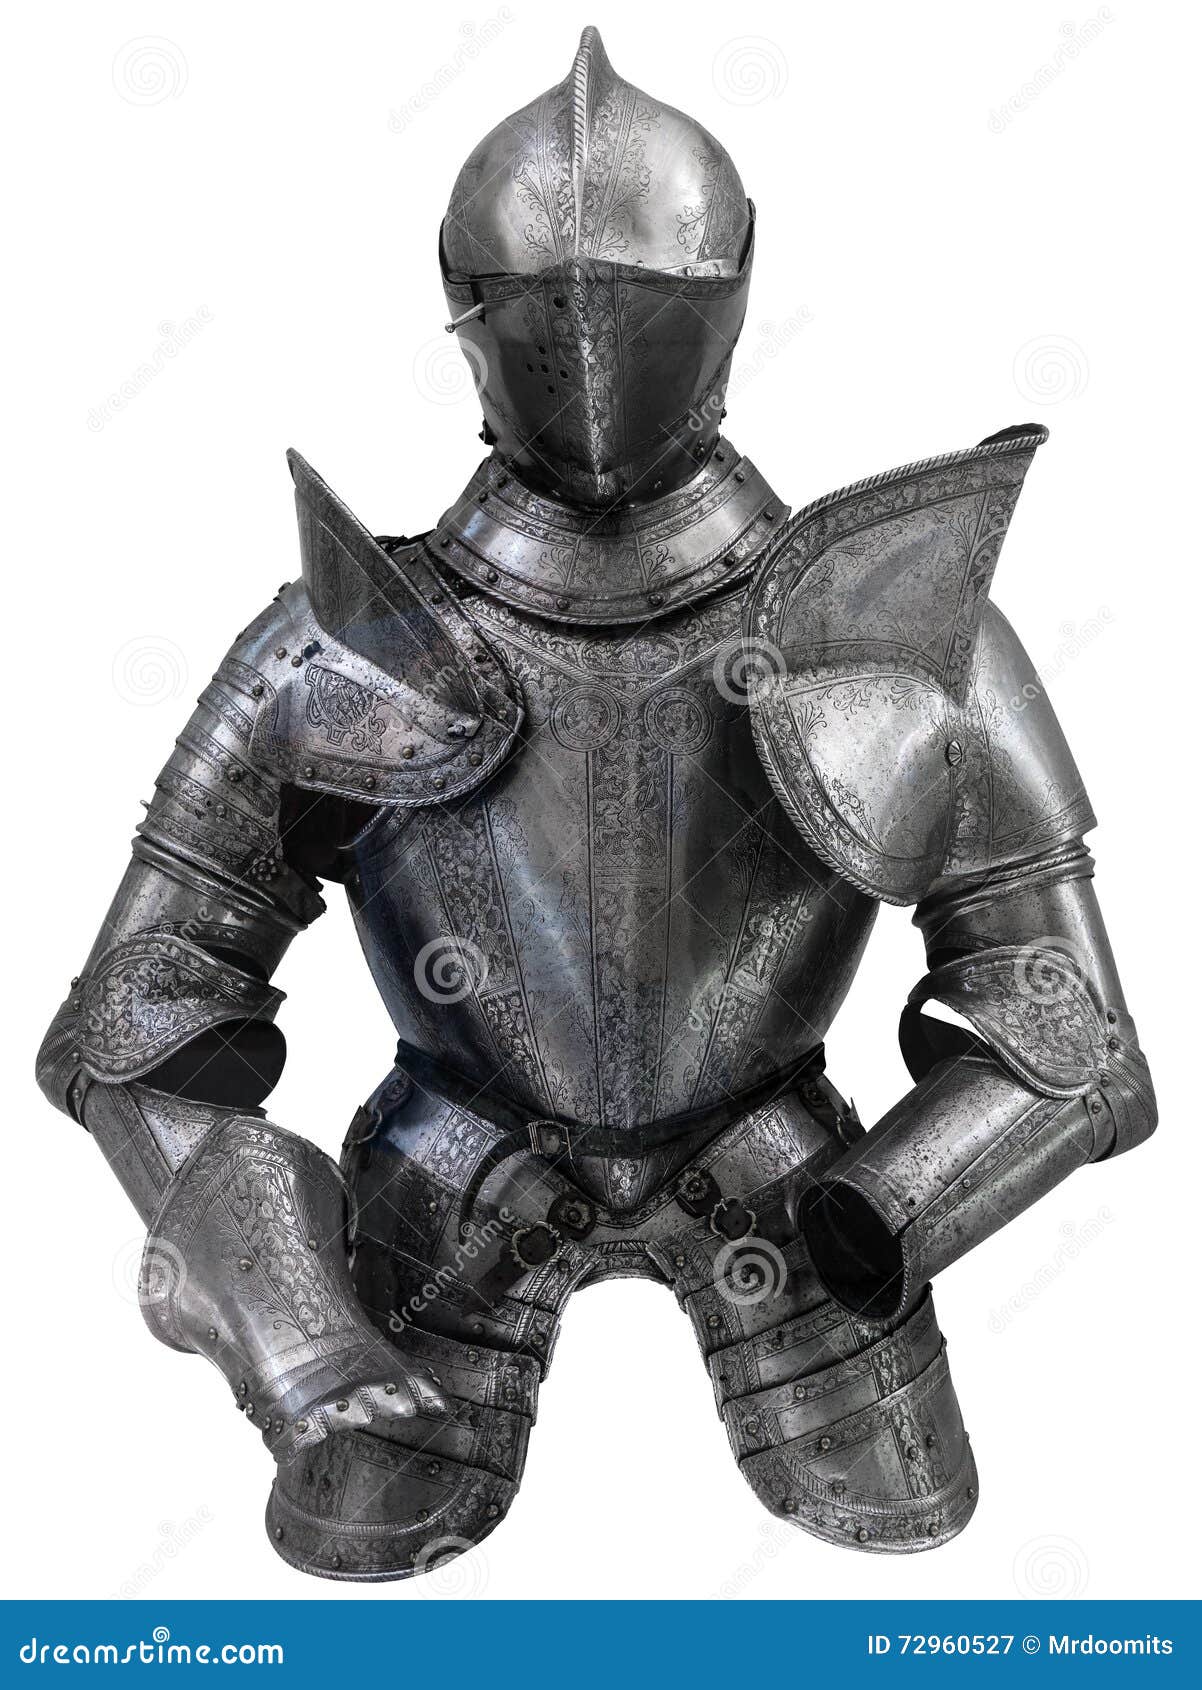 medieval suit of armour